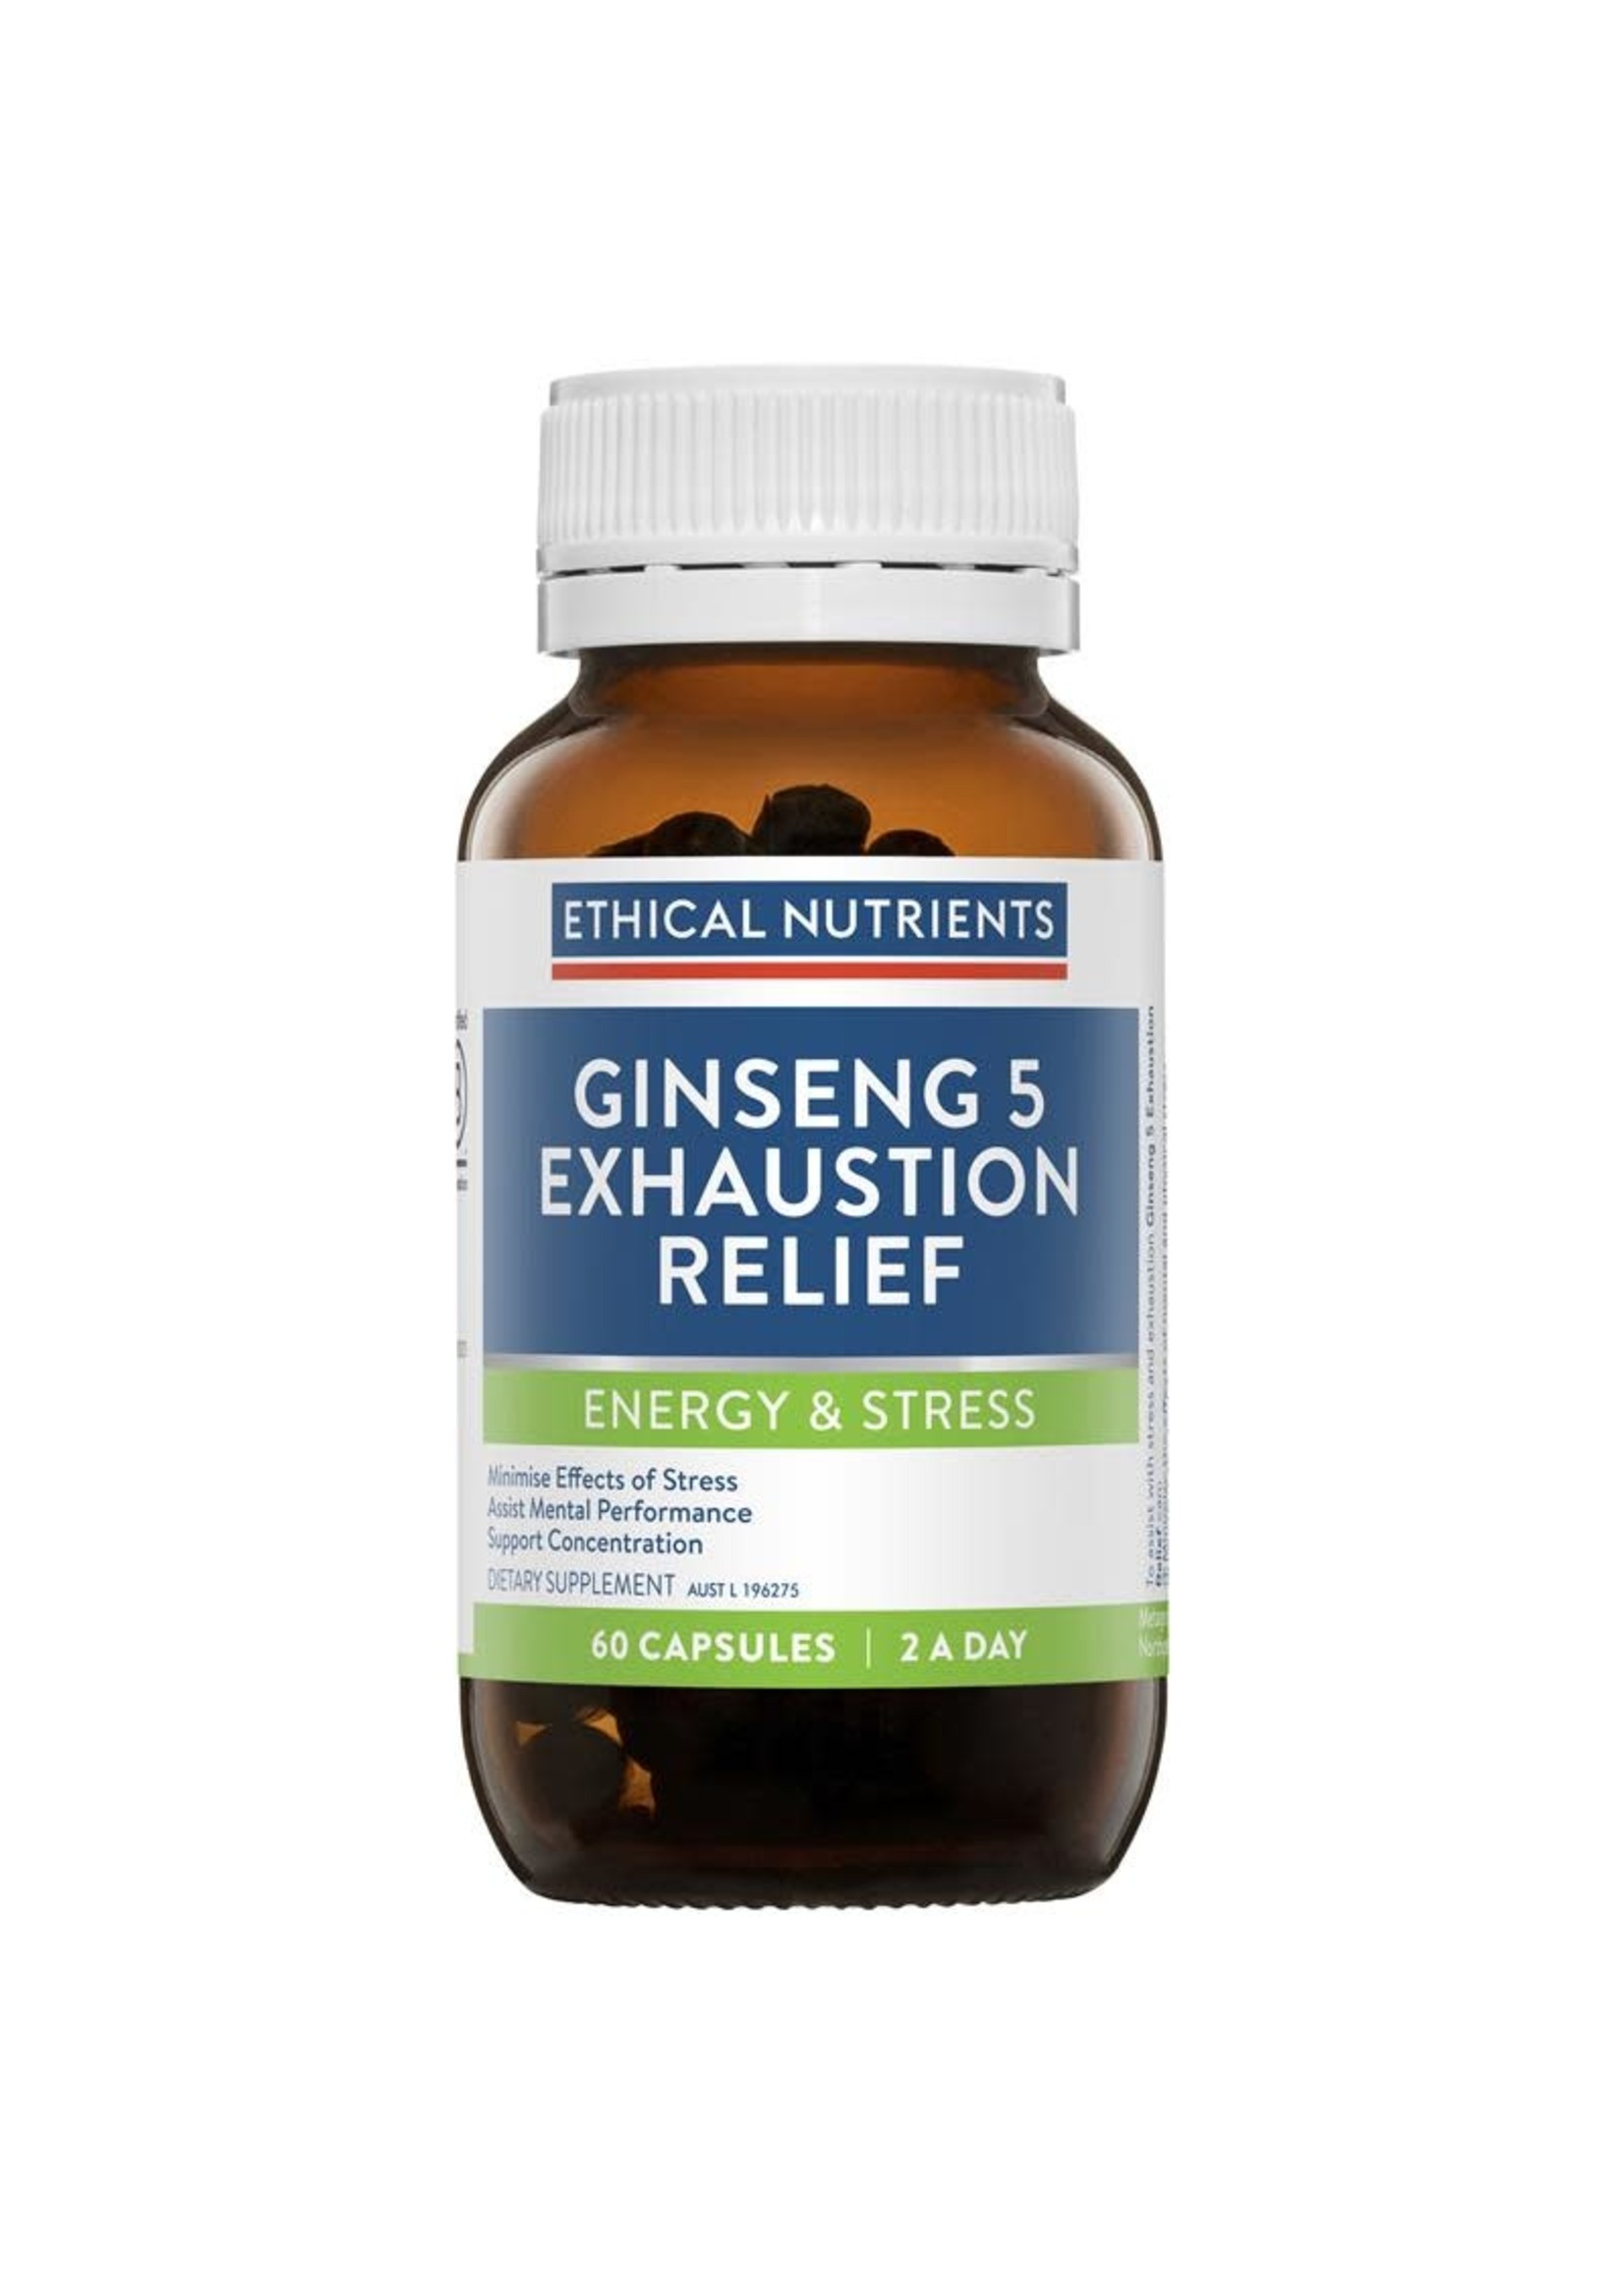 Metagenics Ethical Nutrients Ginseng-5 Exhaustion Relief 60 caps